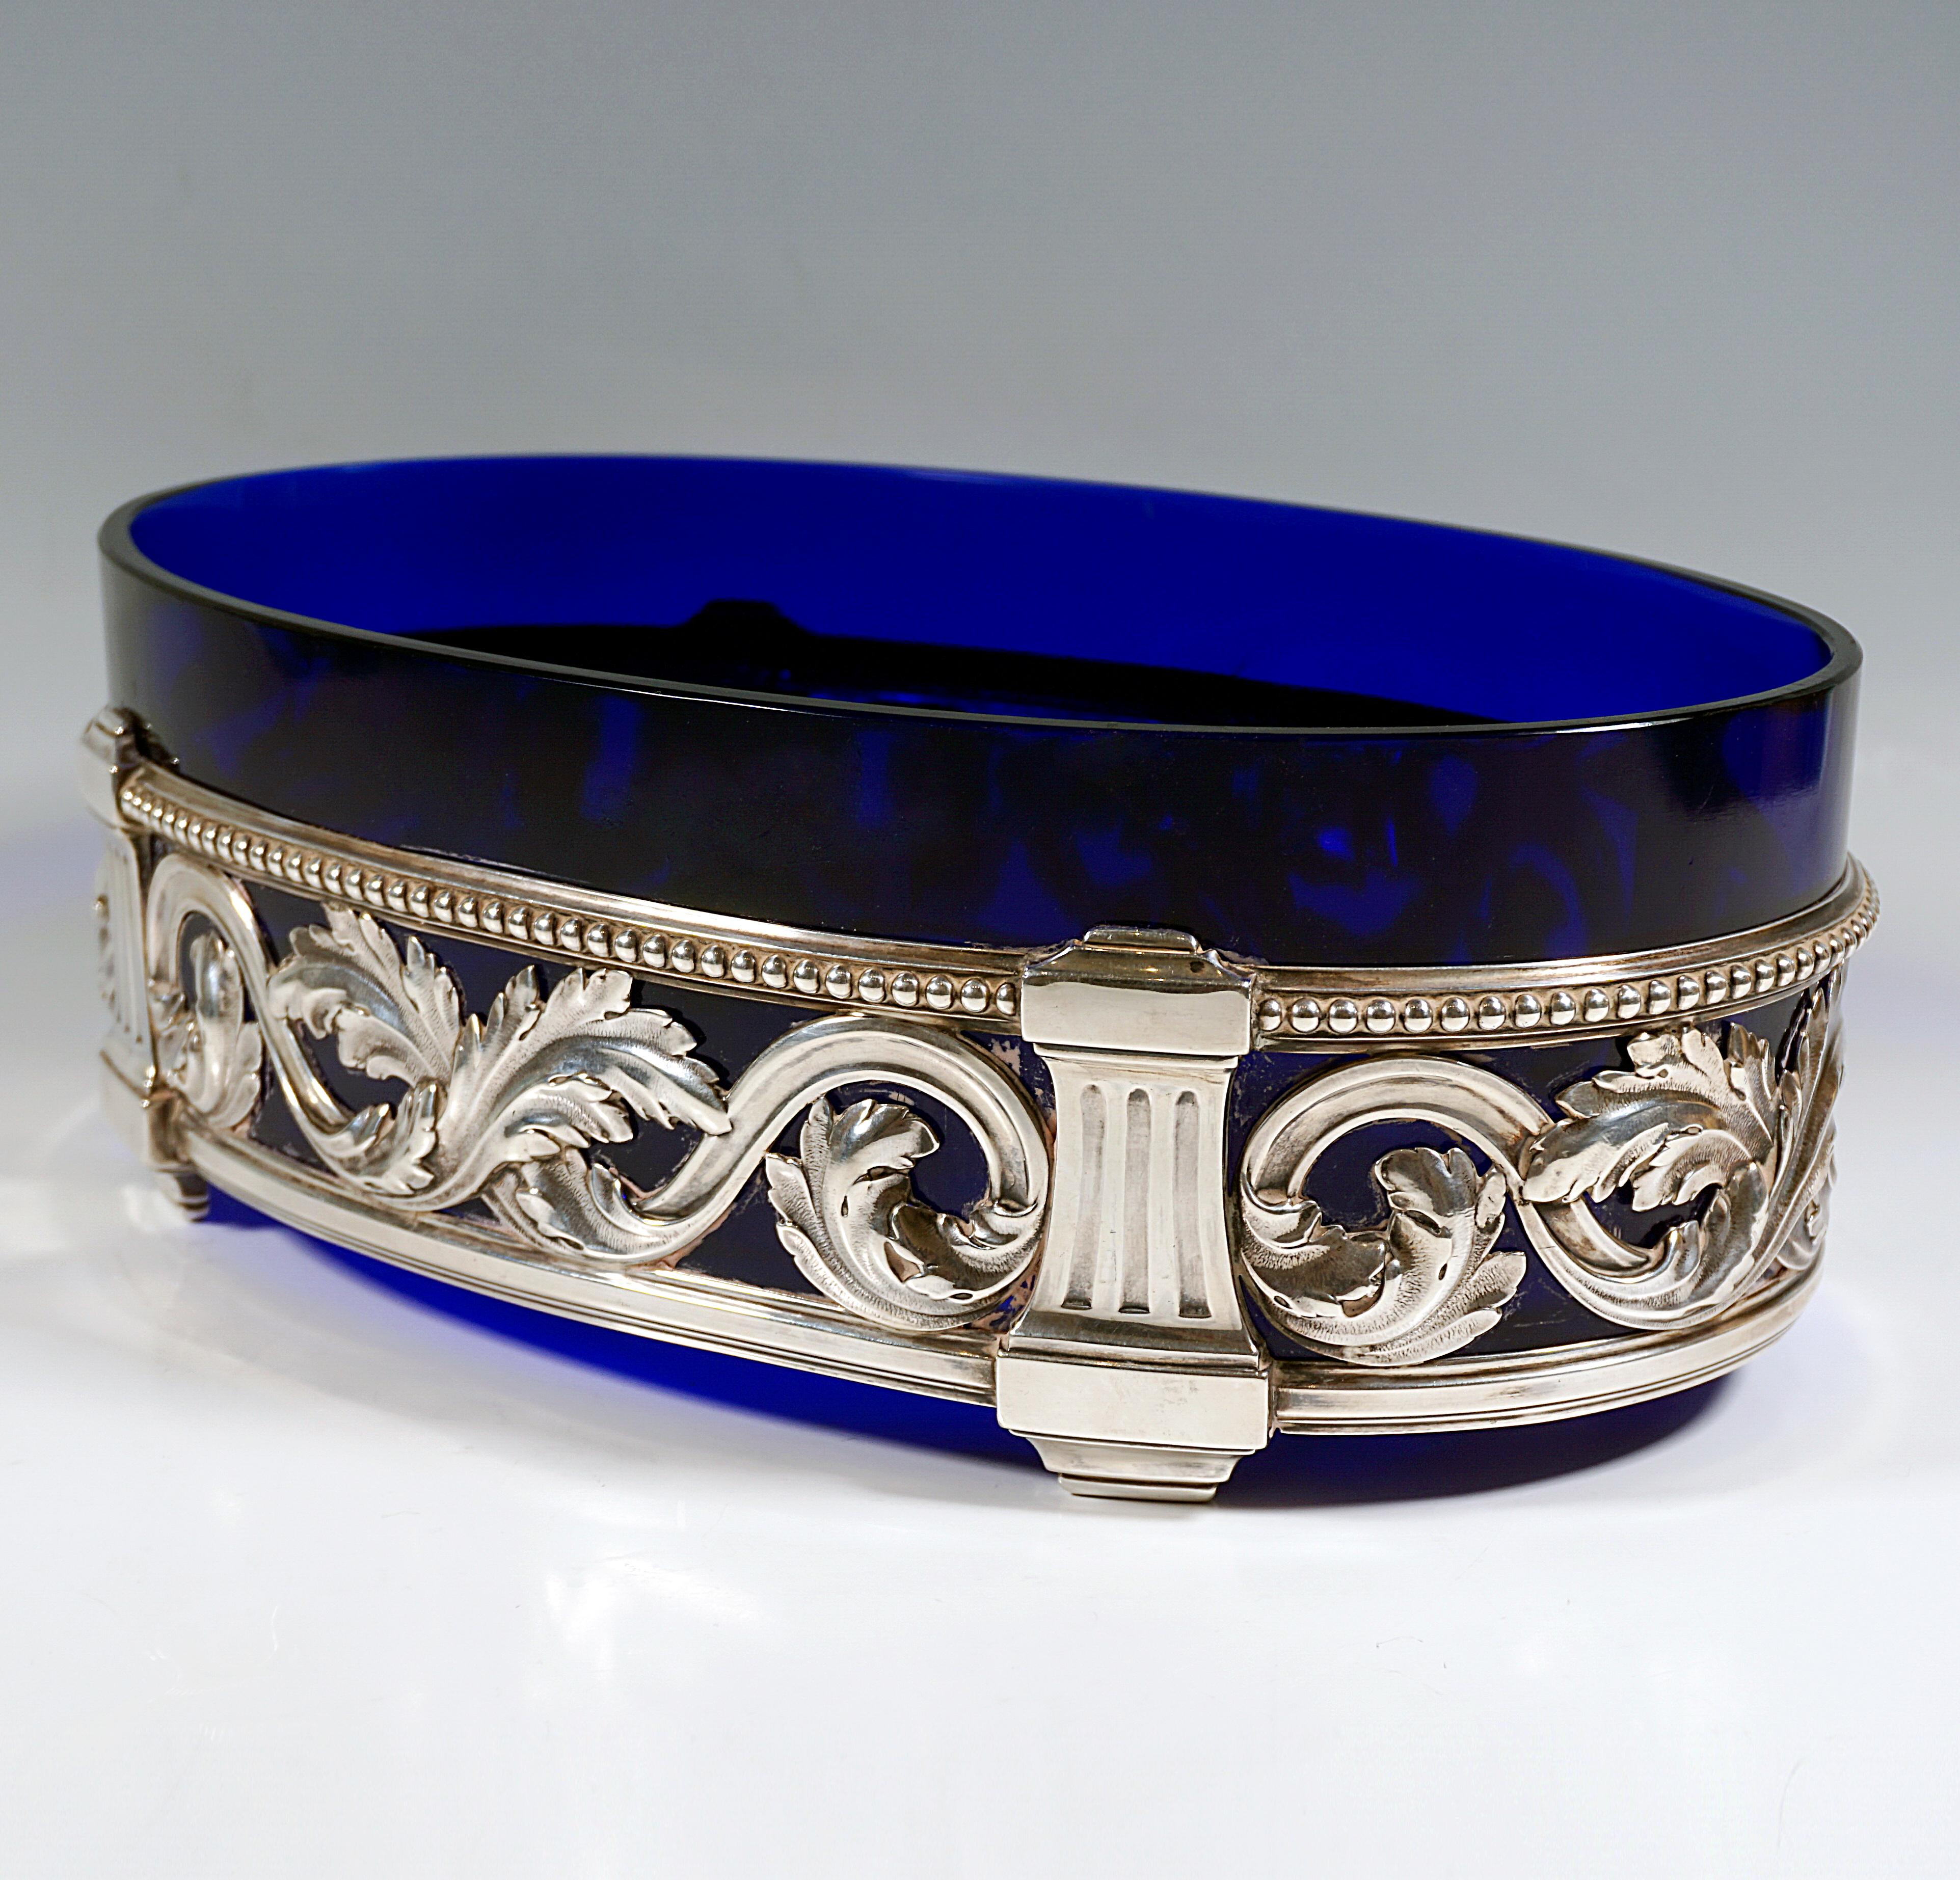 Elegant silver jardinière in the form of an openwork oval band with encircling, intertwined acanthus leaf volutes and beaded decoration on the upper edge, structured by four fluted pilasters with feet, which also form brackets for the cobalt blue